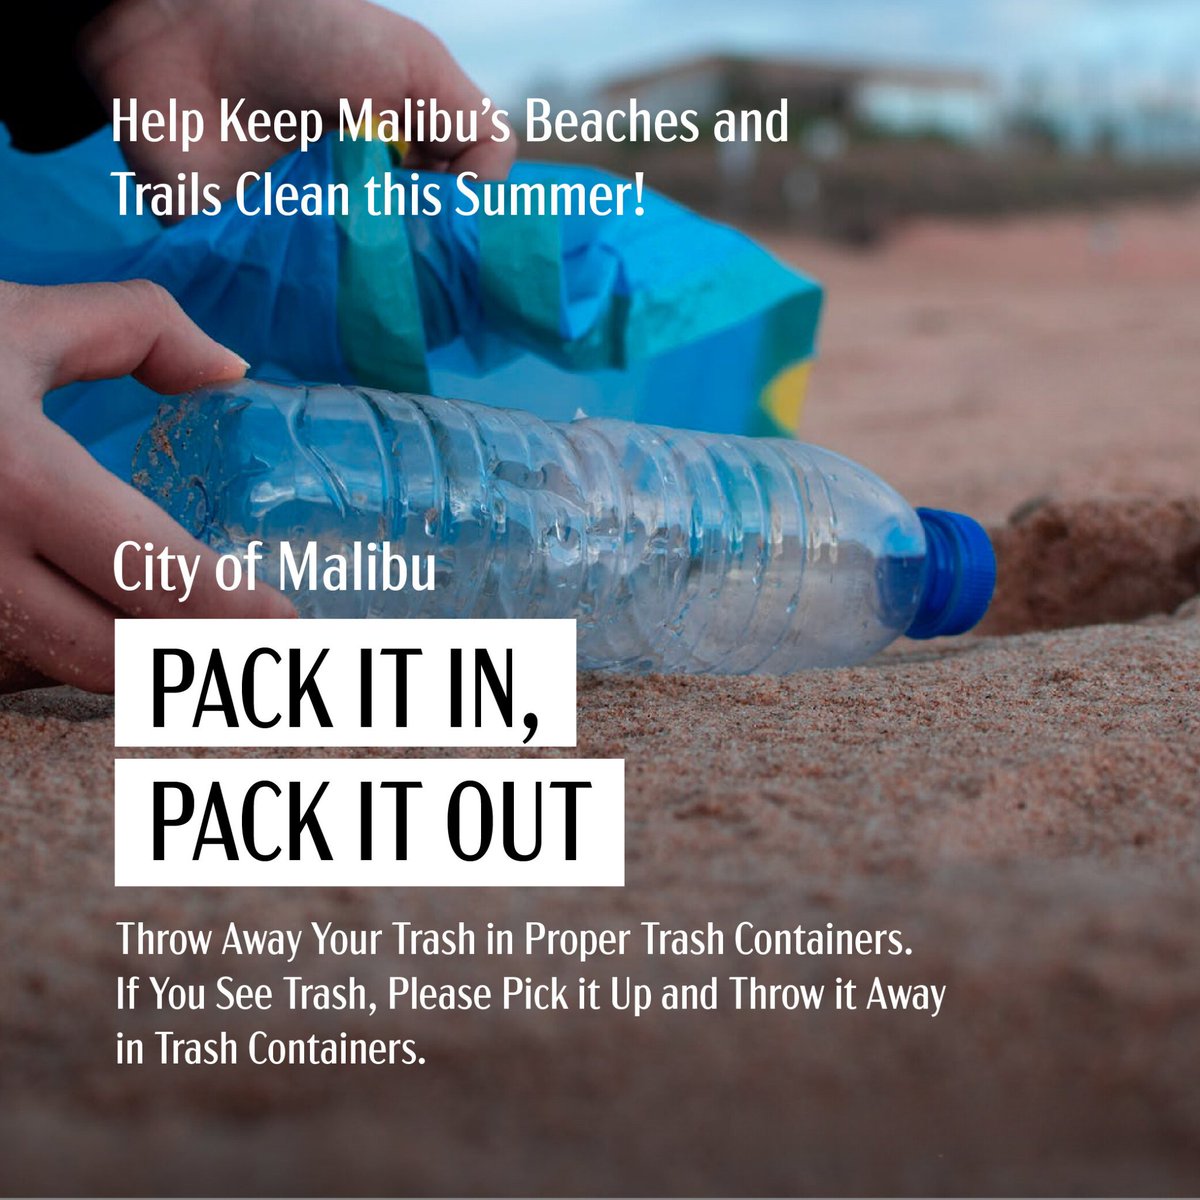 Memorial Day weekend is here, so please help keep Malibu's beaches, trails & neighborhoods clean & beautiful for all to enjoy this summer! Leave no trace! Don't litter & if you see trash, please pick it up & put it in a trash container! @lacdbh @LACo_Lifeguards @castateparks